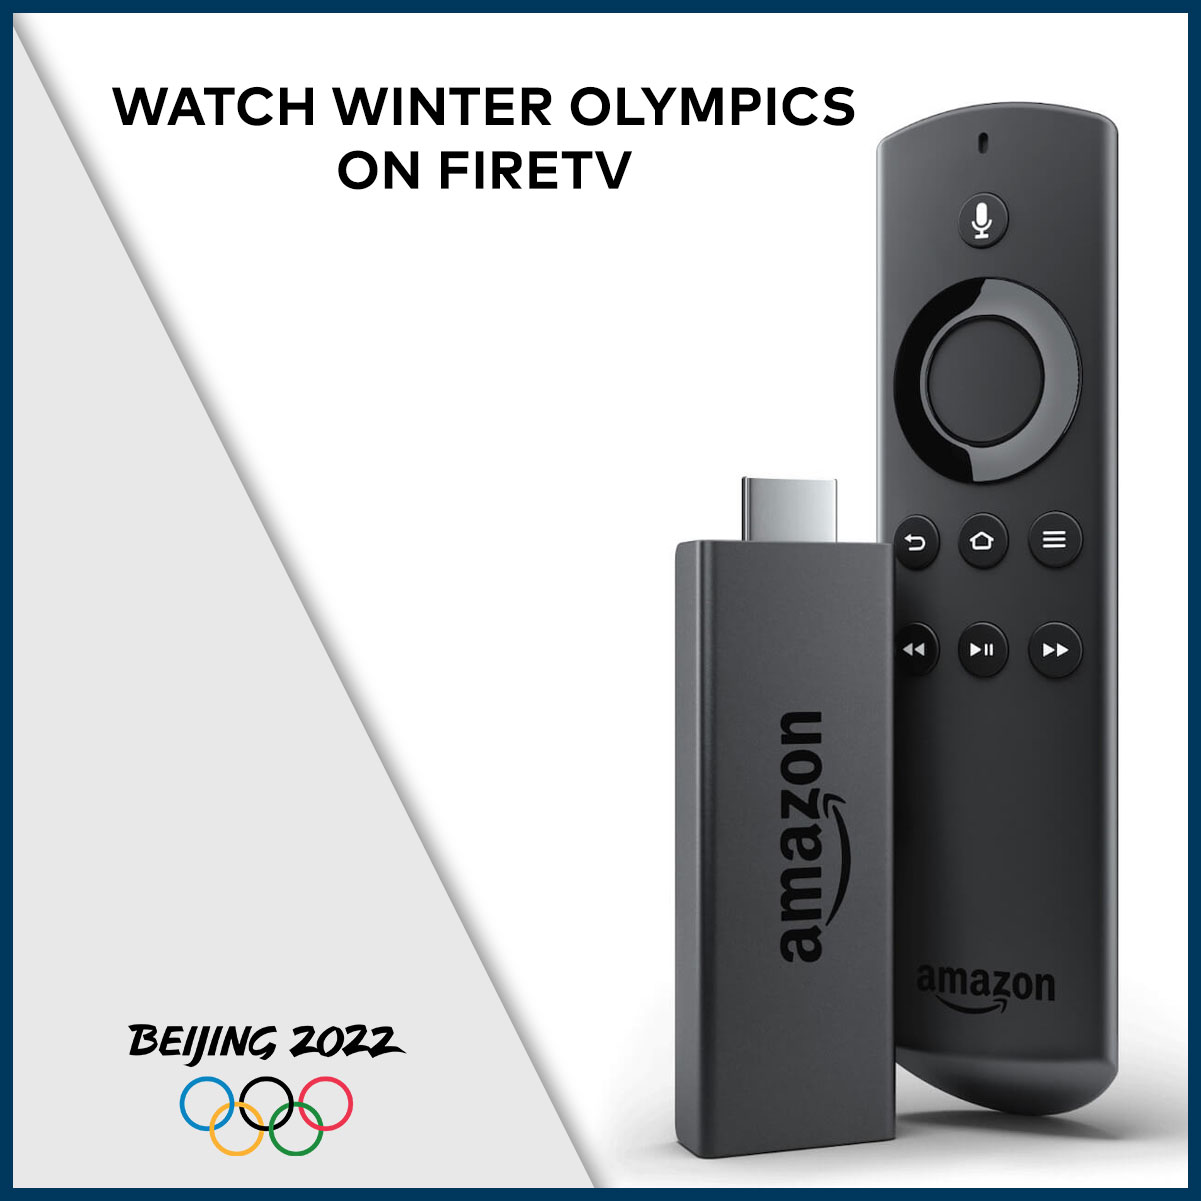 How to Watch Winter Olympics on Amazon Fire TV Stick